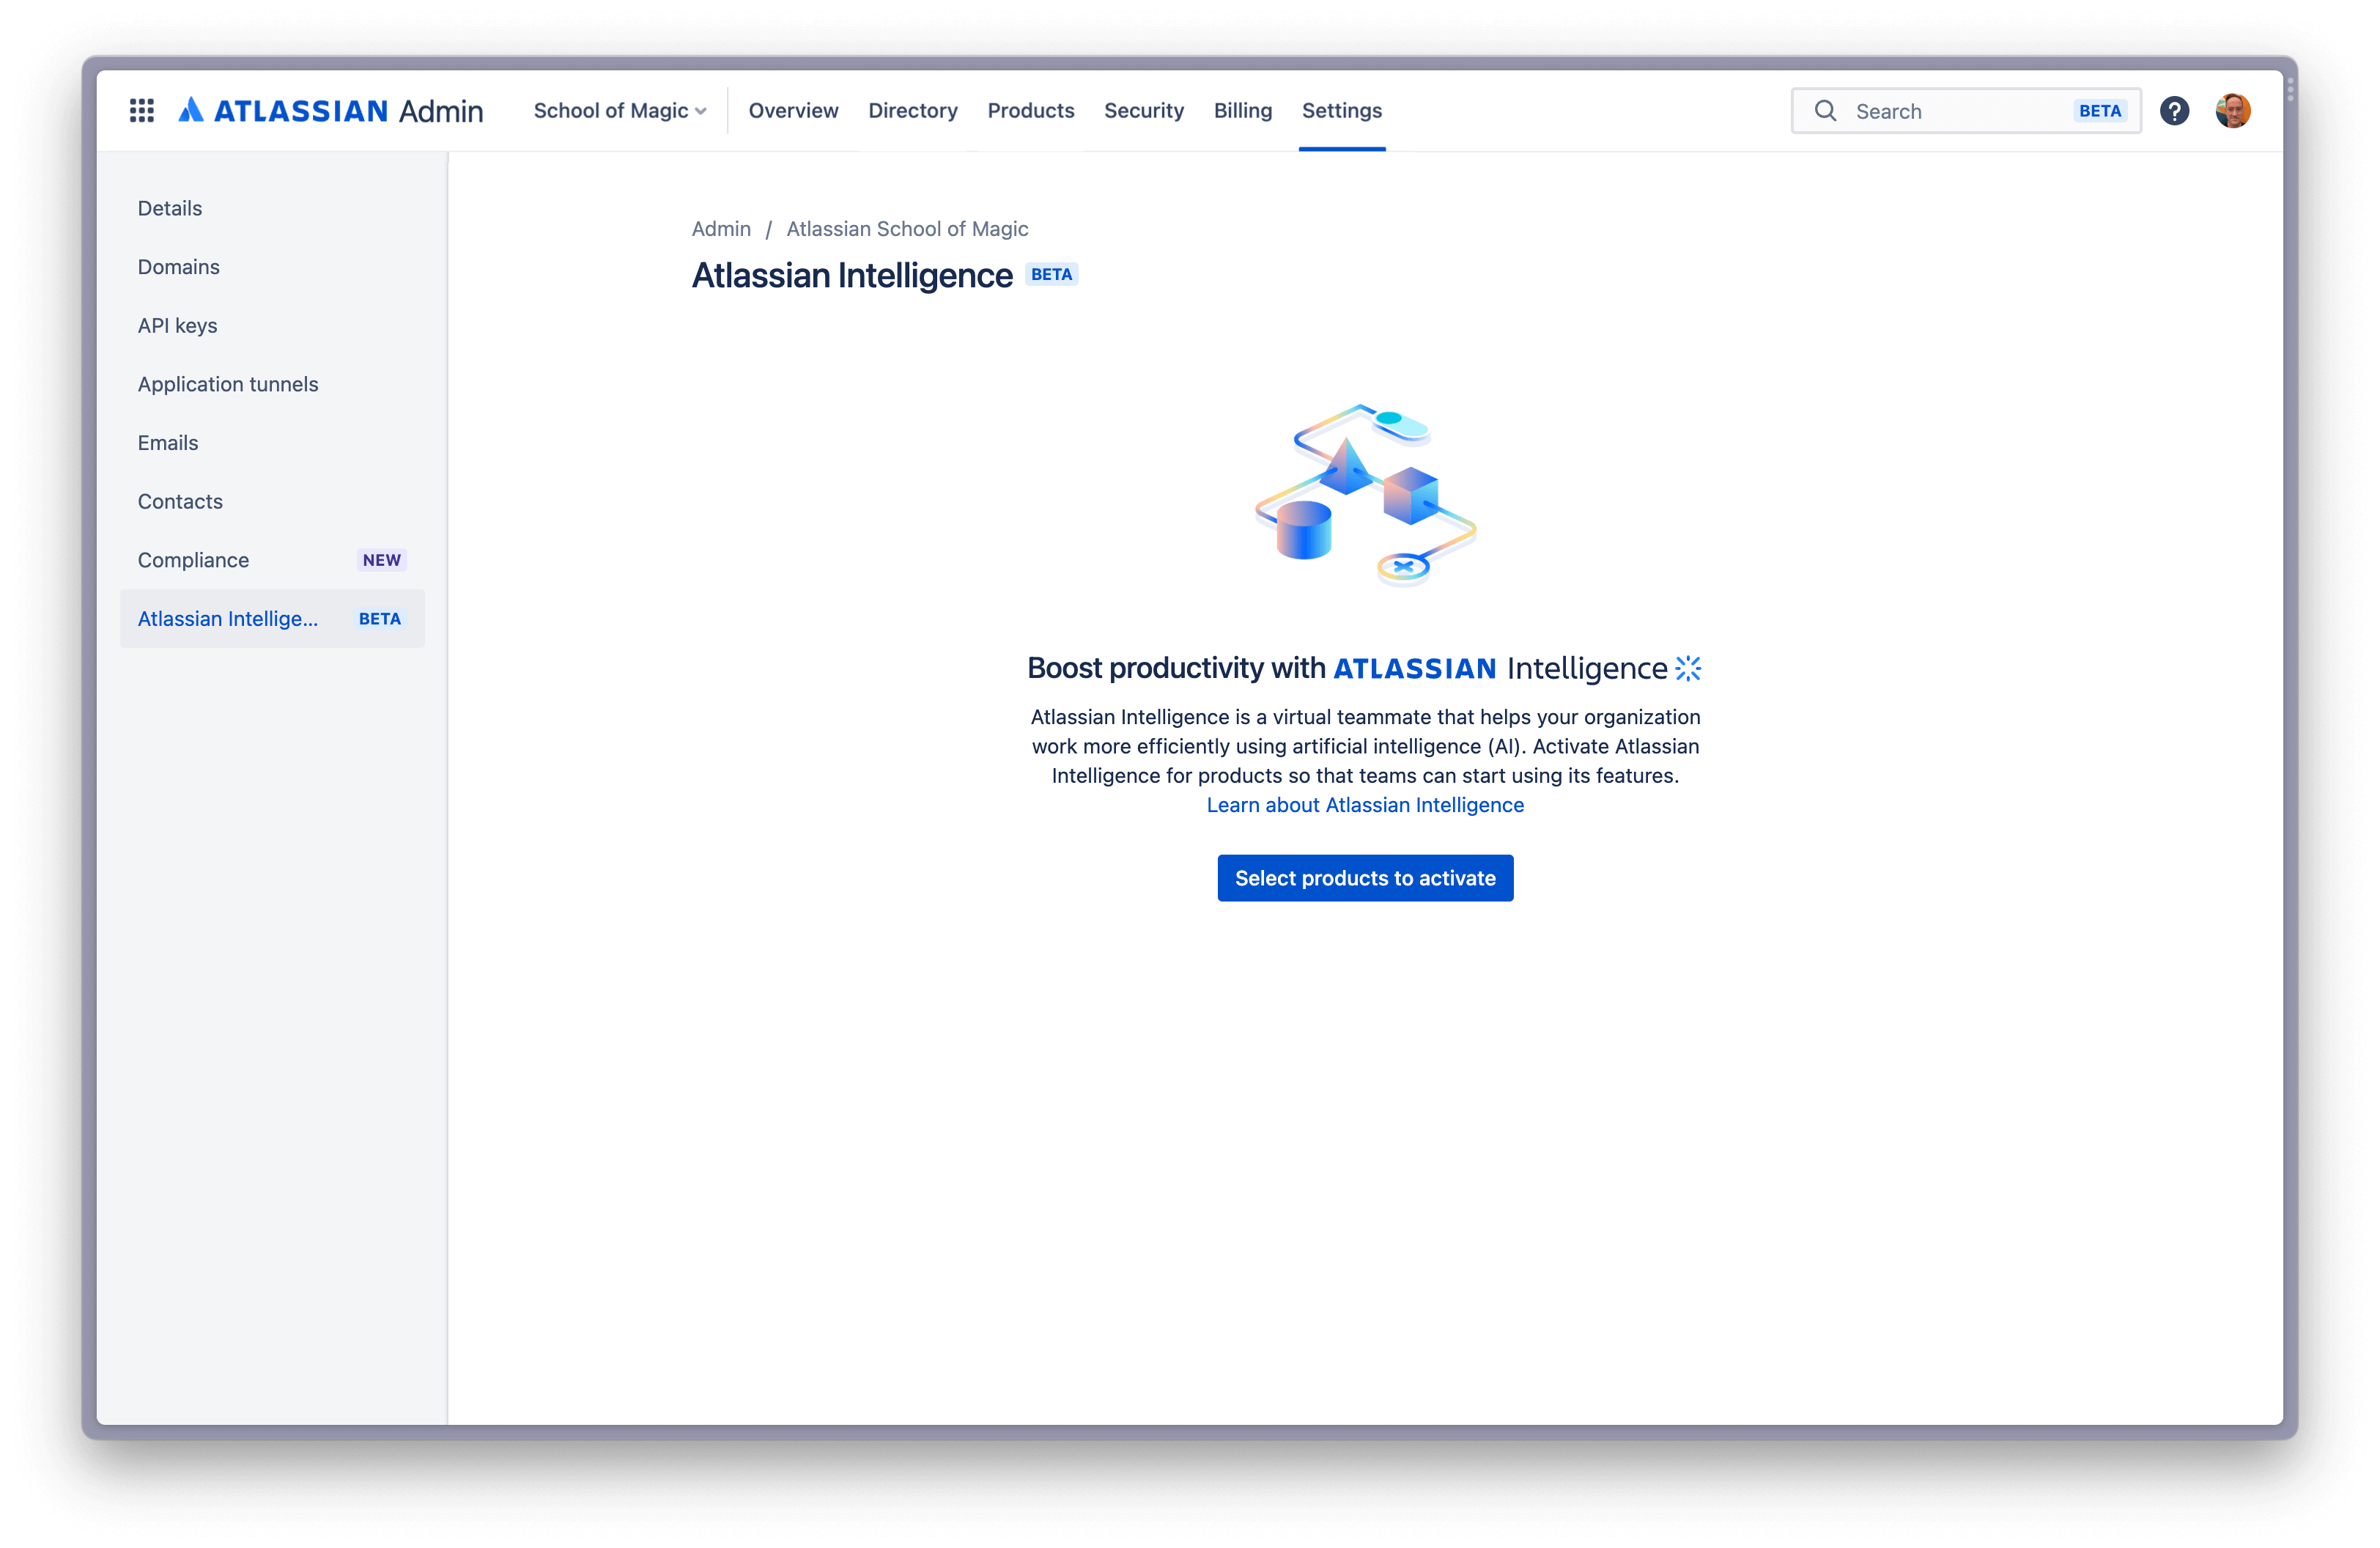 Selecting "Atlassian Intelligence" from the left navigation panel in Admin Hub